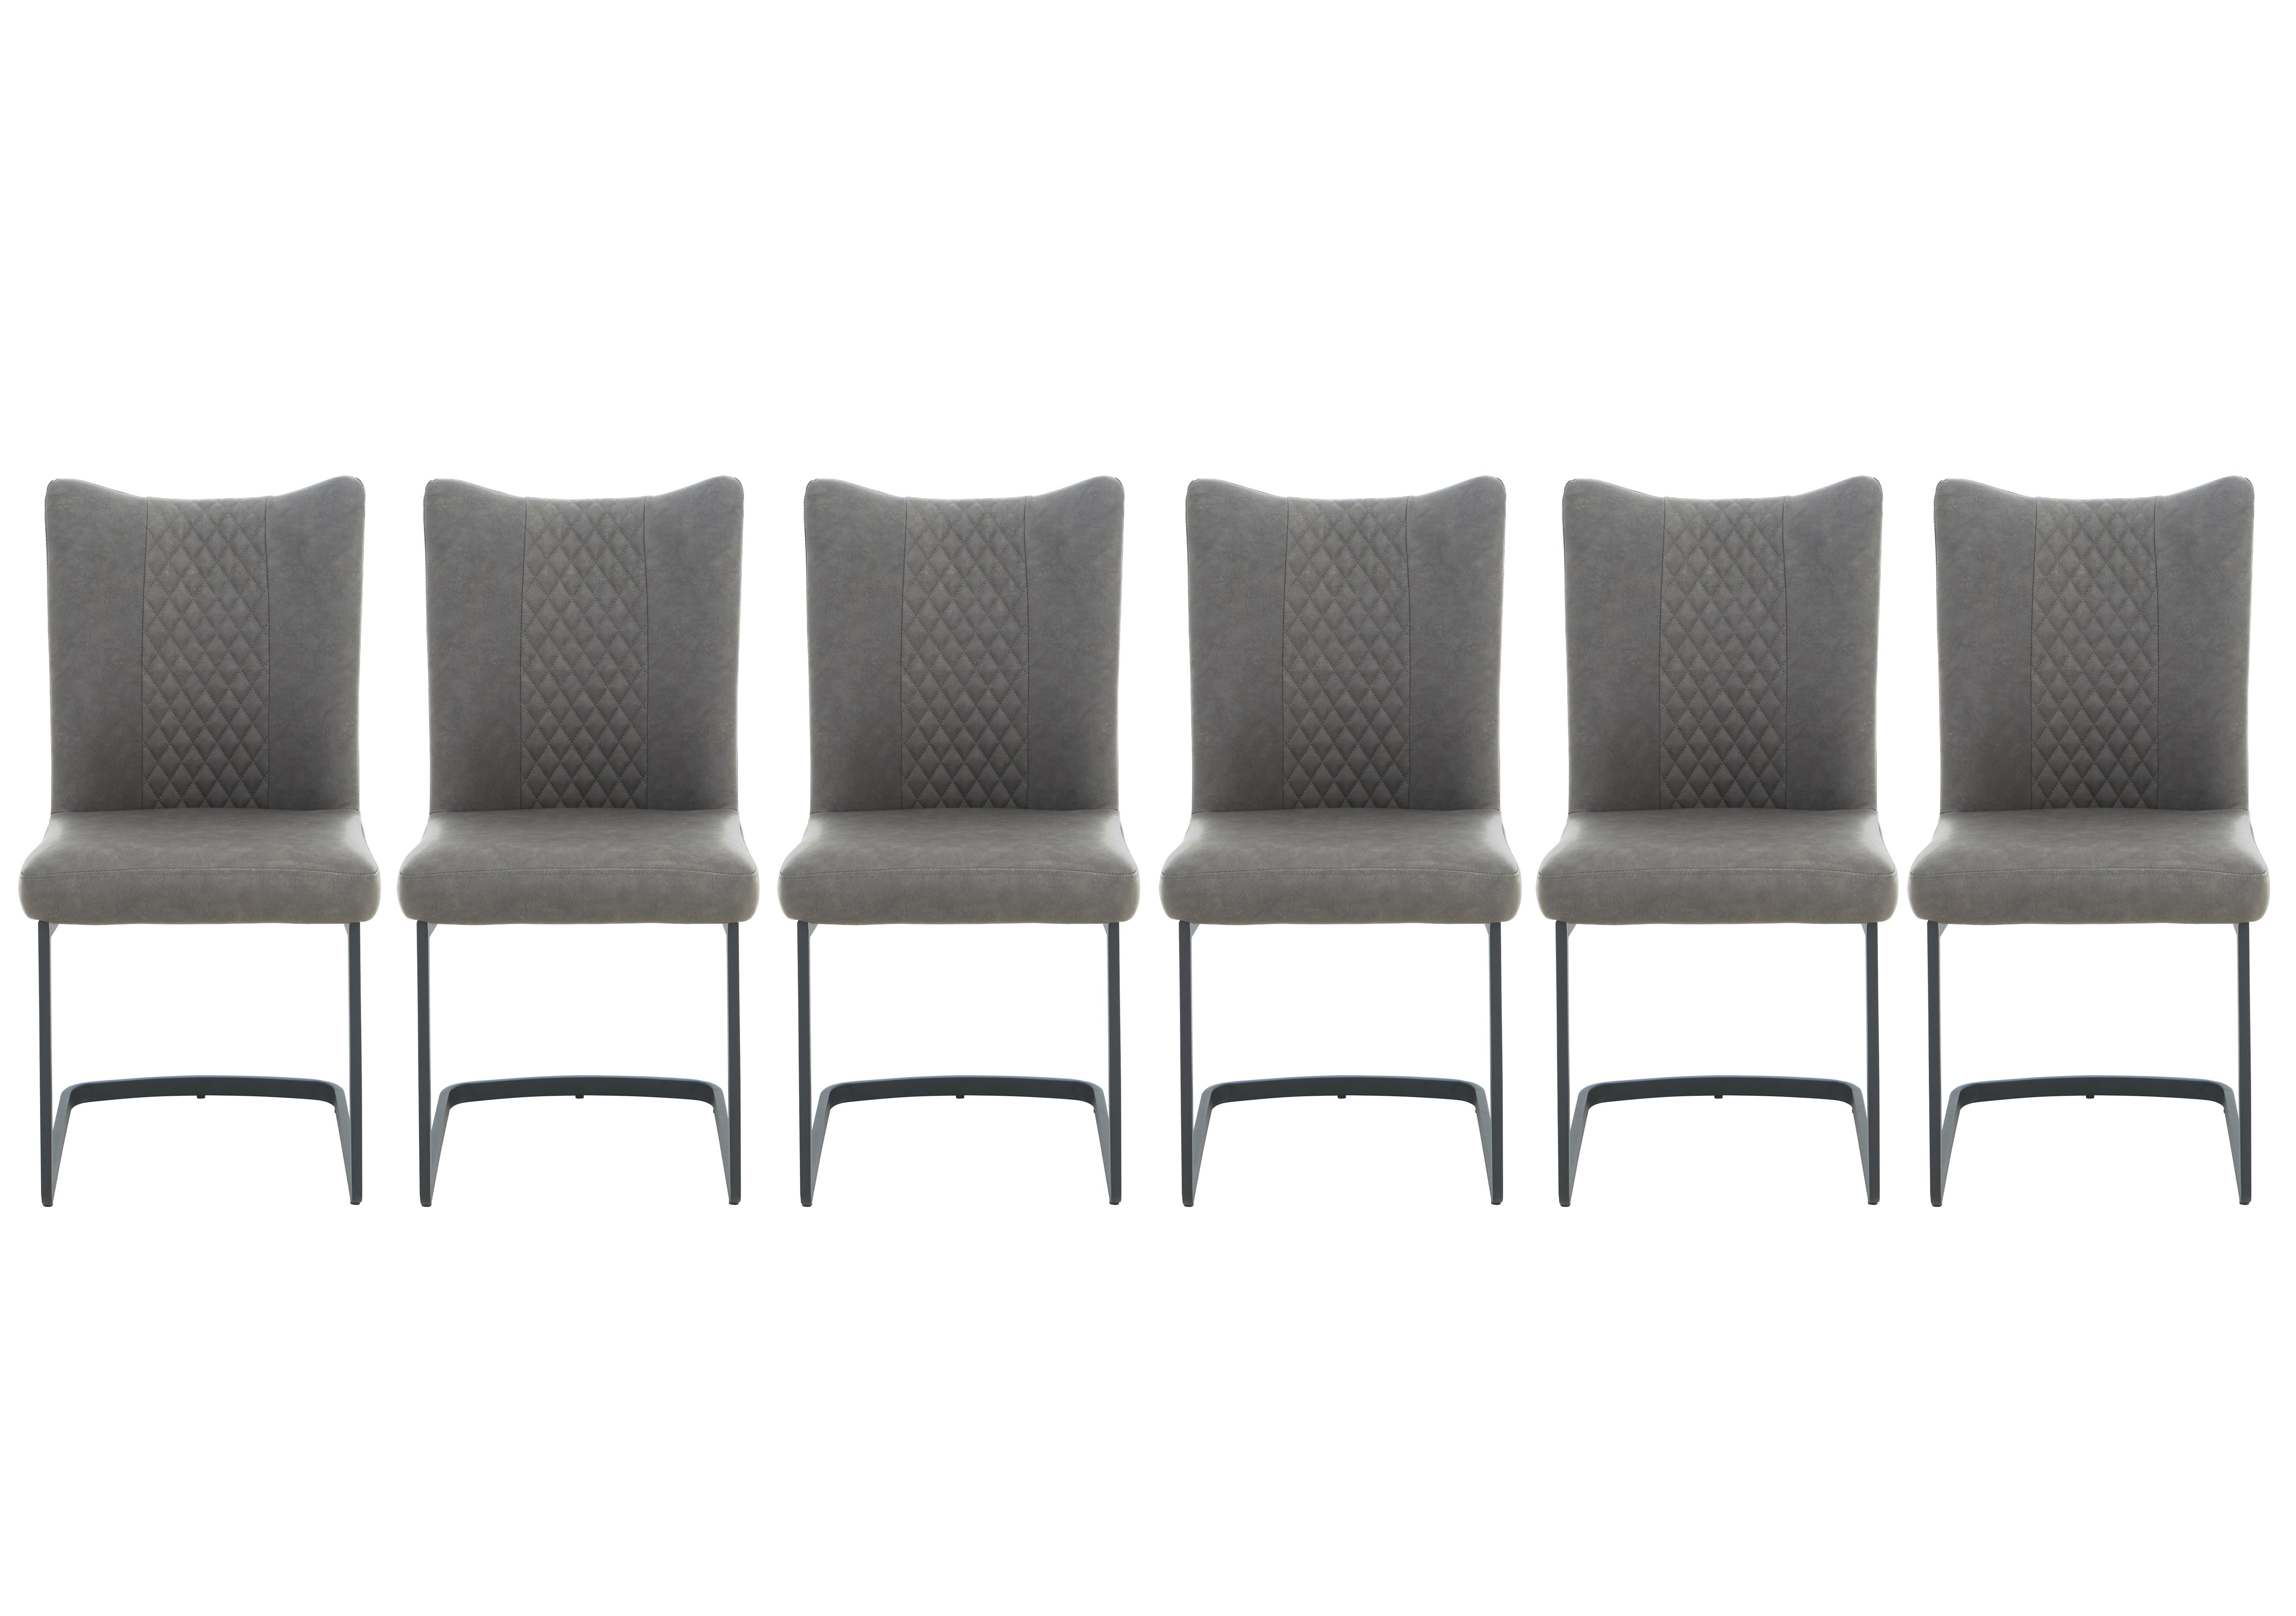 Loki Set of 6 Cantilever Dining Chairs in Vintage Grey on Furniture Village